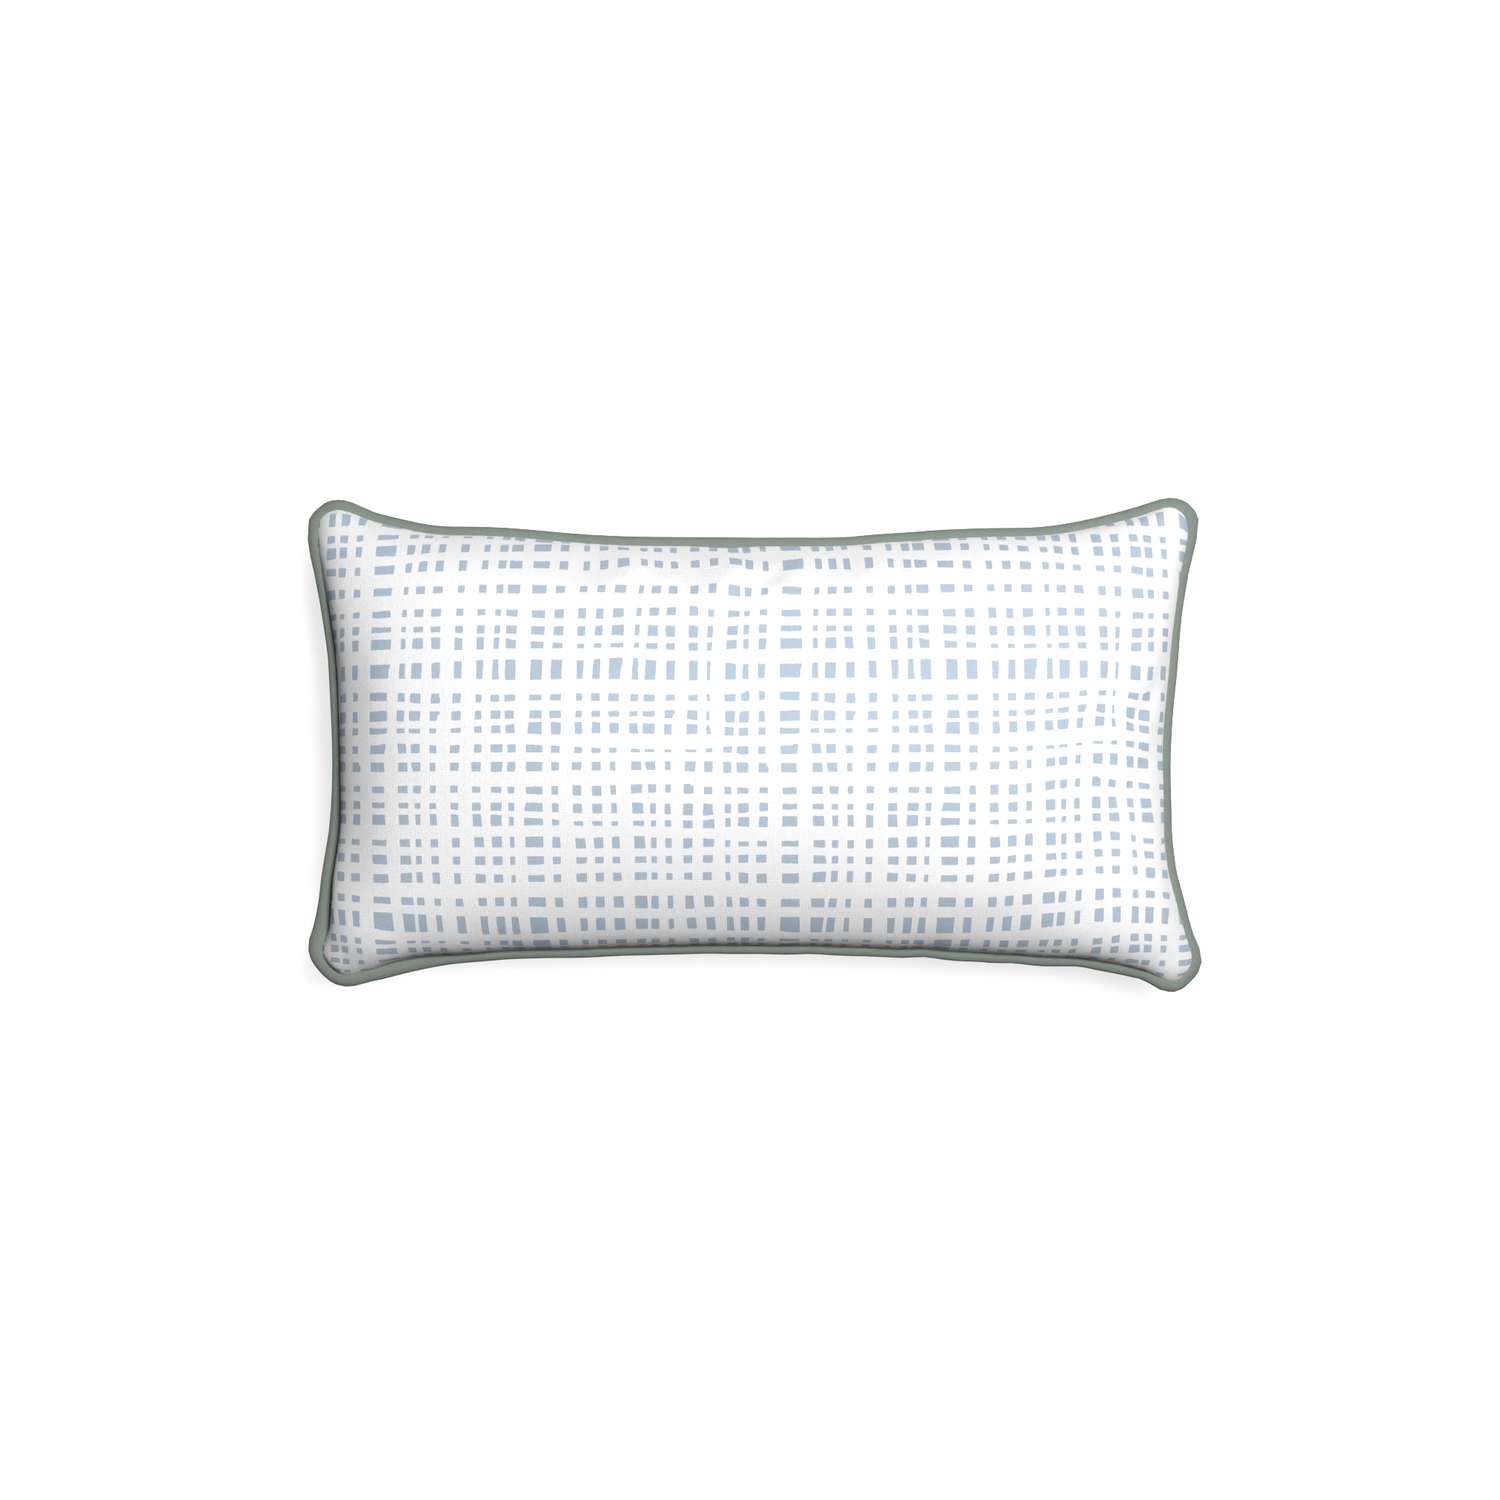 Petite-lumbar ginger sky custom plaid sky bluepillow with sage piping on white background